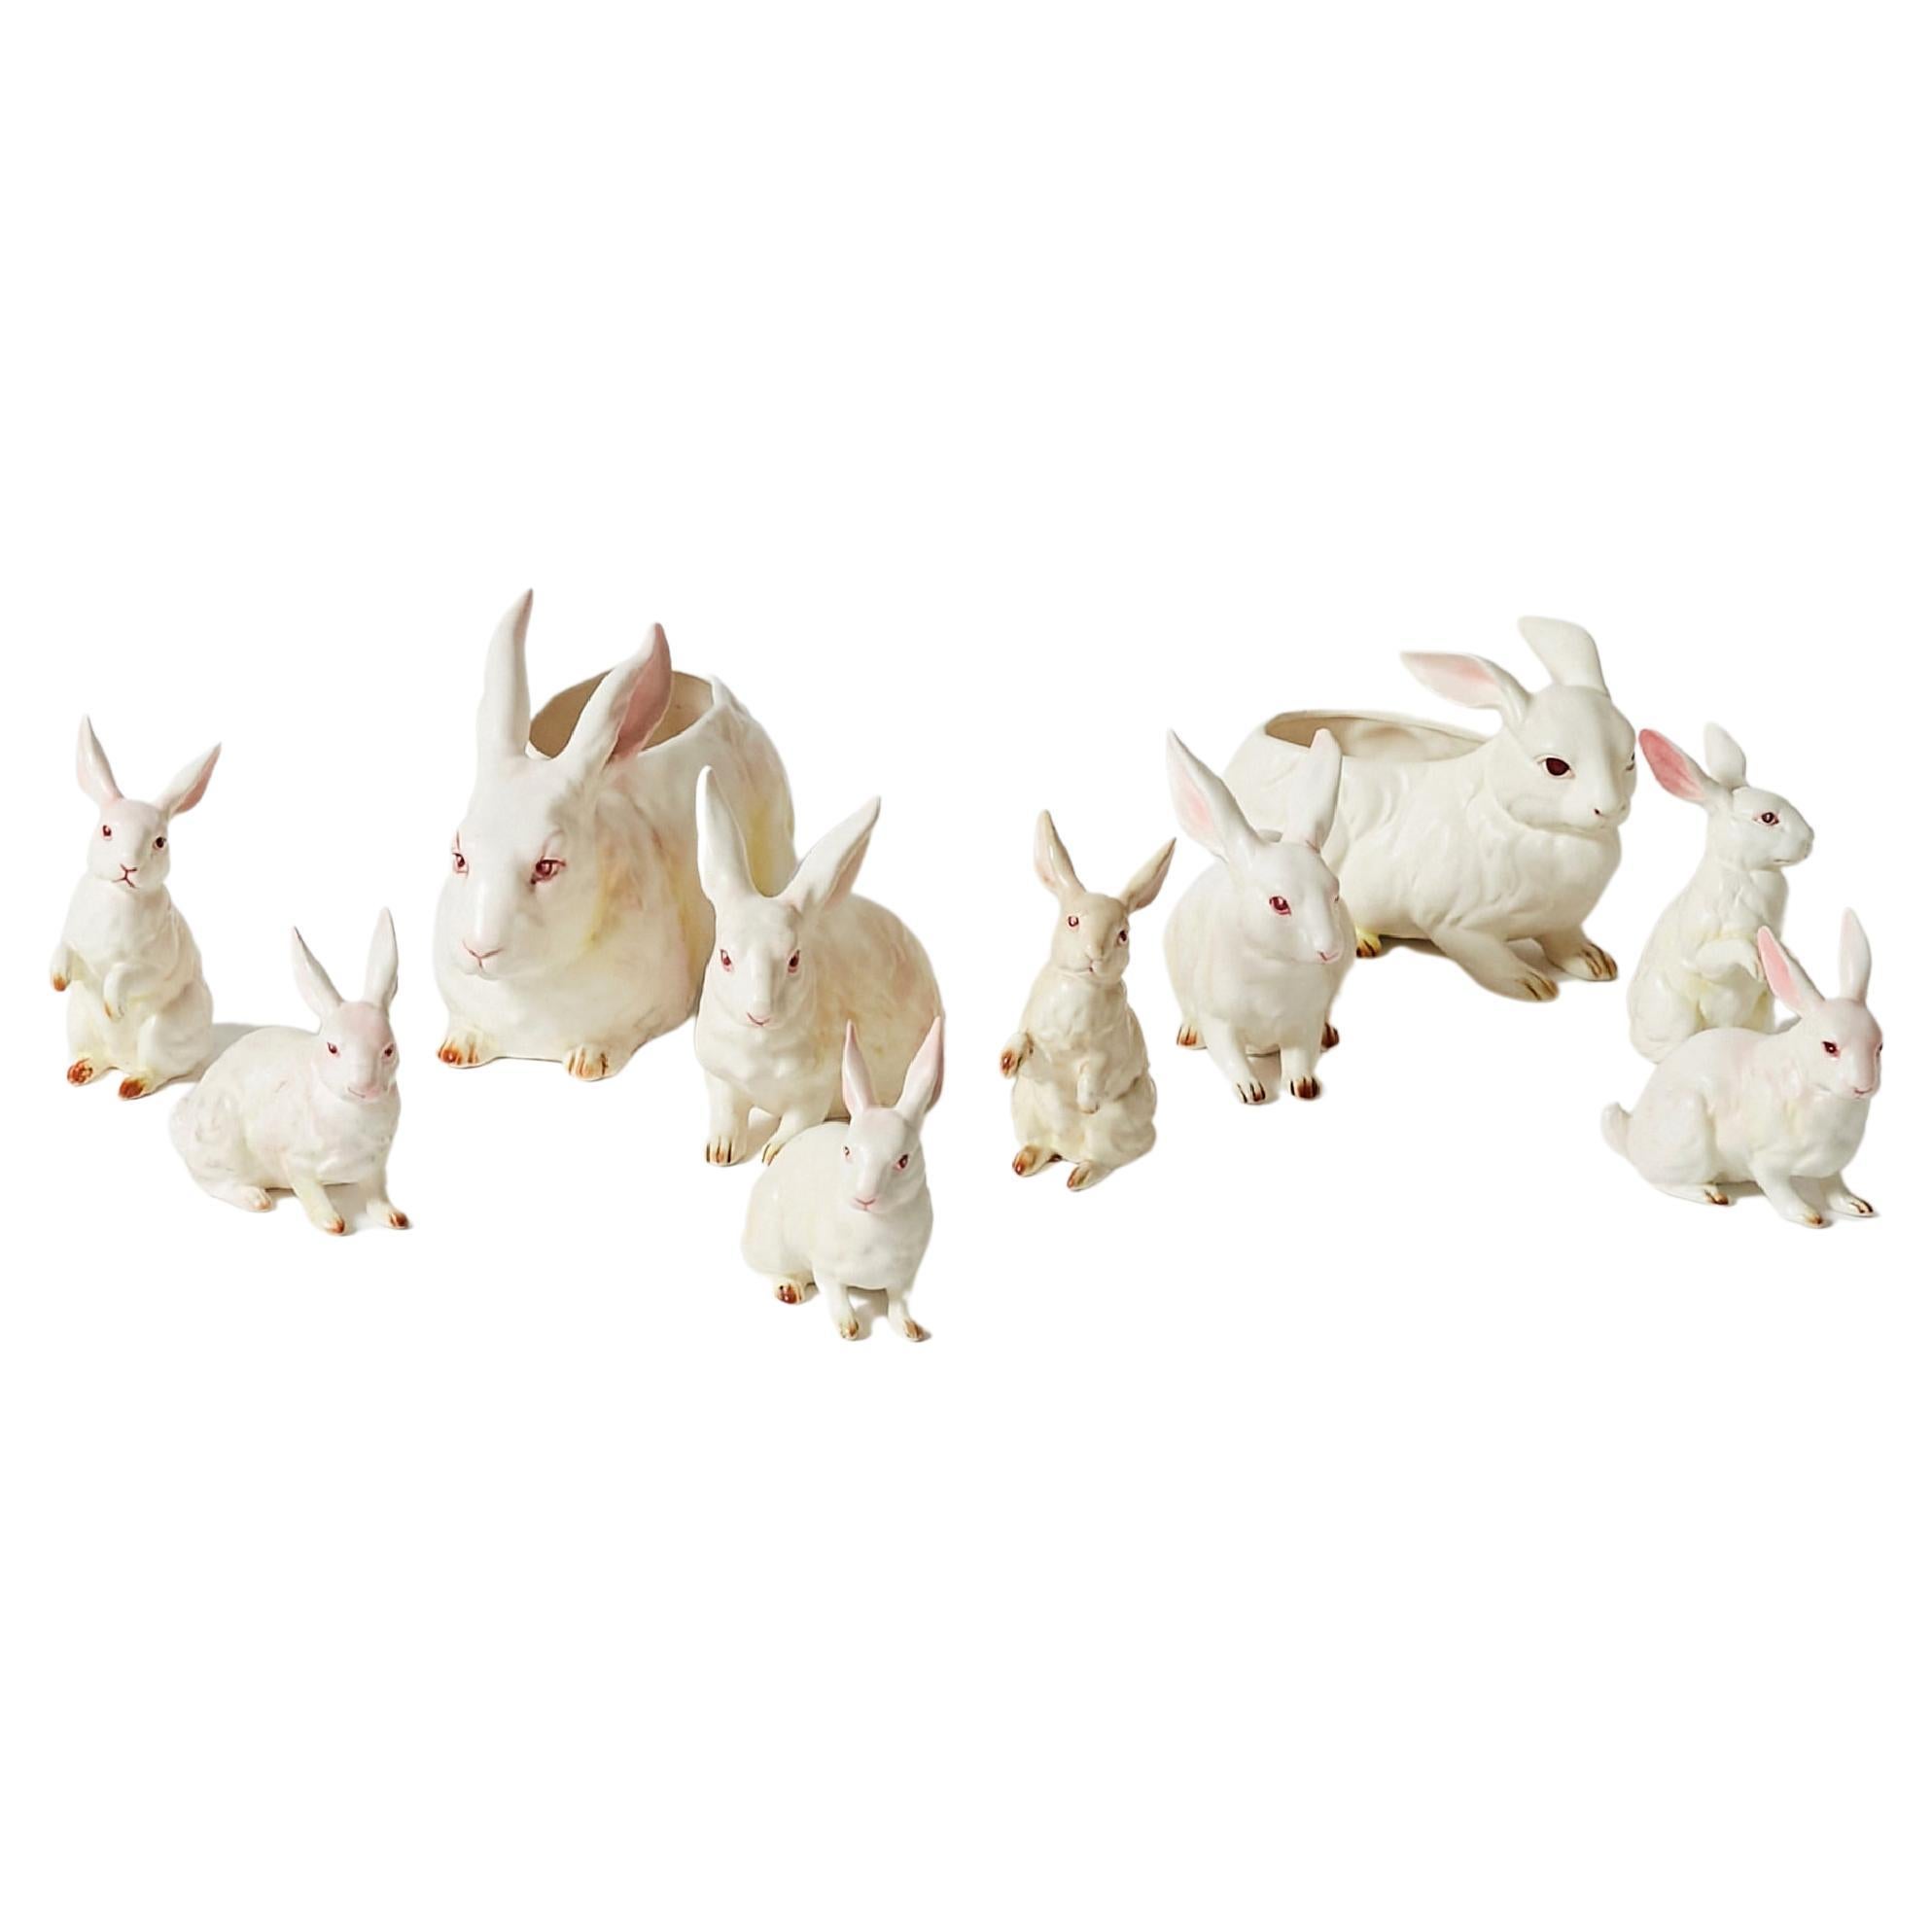 Set of Ten Lefton Hand Painted Porcelain Bunnies Made in Japan in 1960